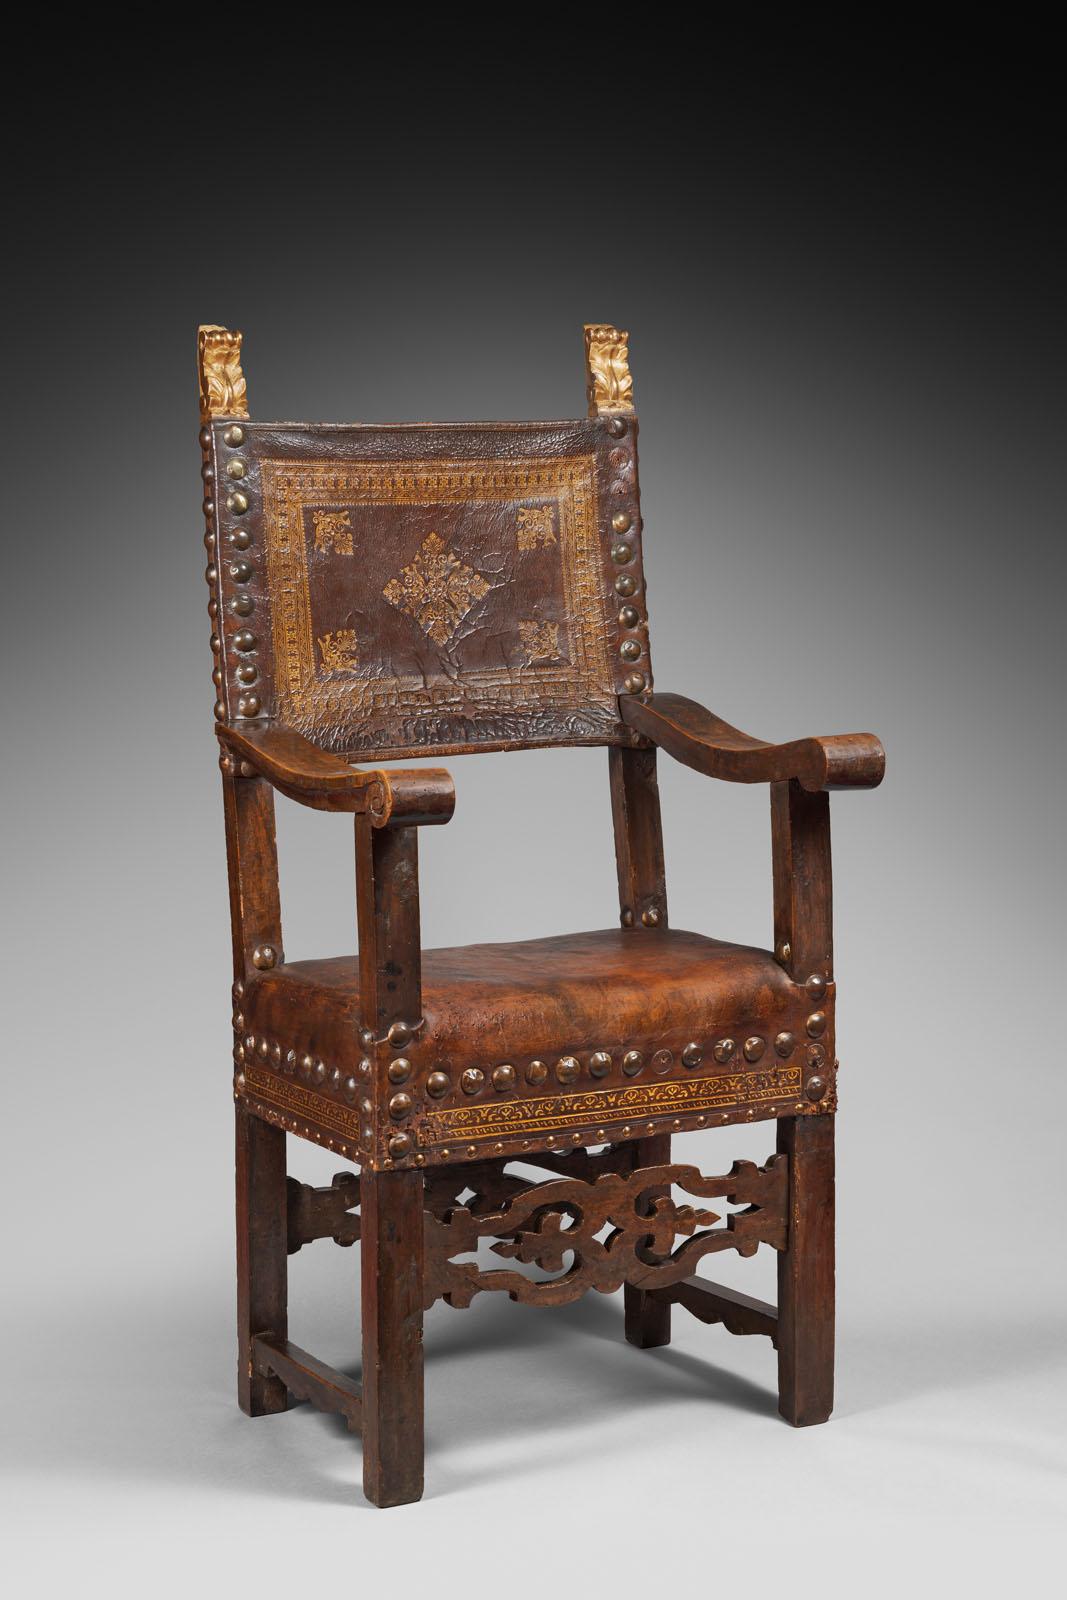 Set of four Italian armchairs

Origin : Italy
Period : 17th century

 Measures: Height : 130 cm
Width : 63 cm
Depth : 38 cm 

Walnut 

Set of four walnut armchairs with openwork crossbars, leather upholstery and brass nails. The wood